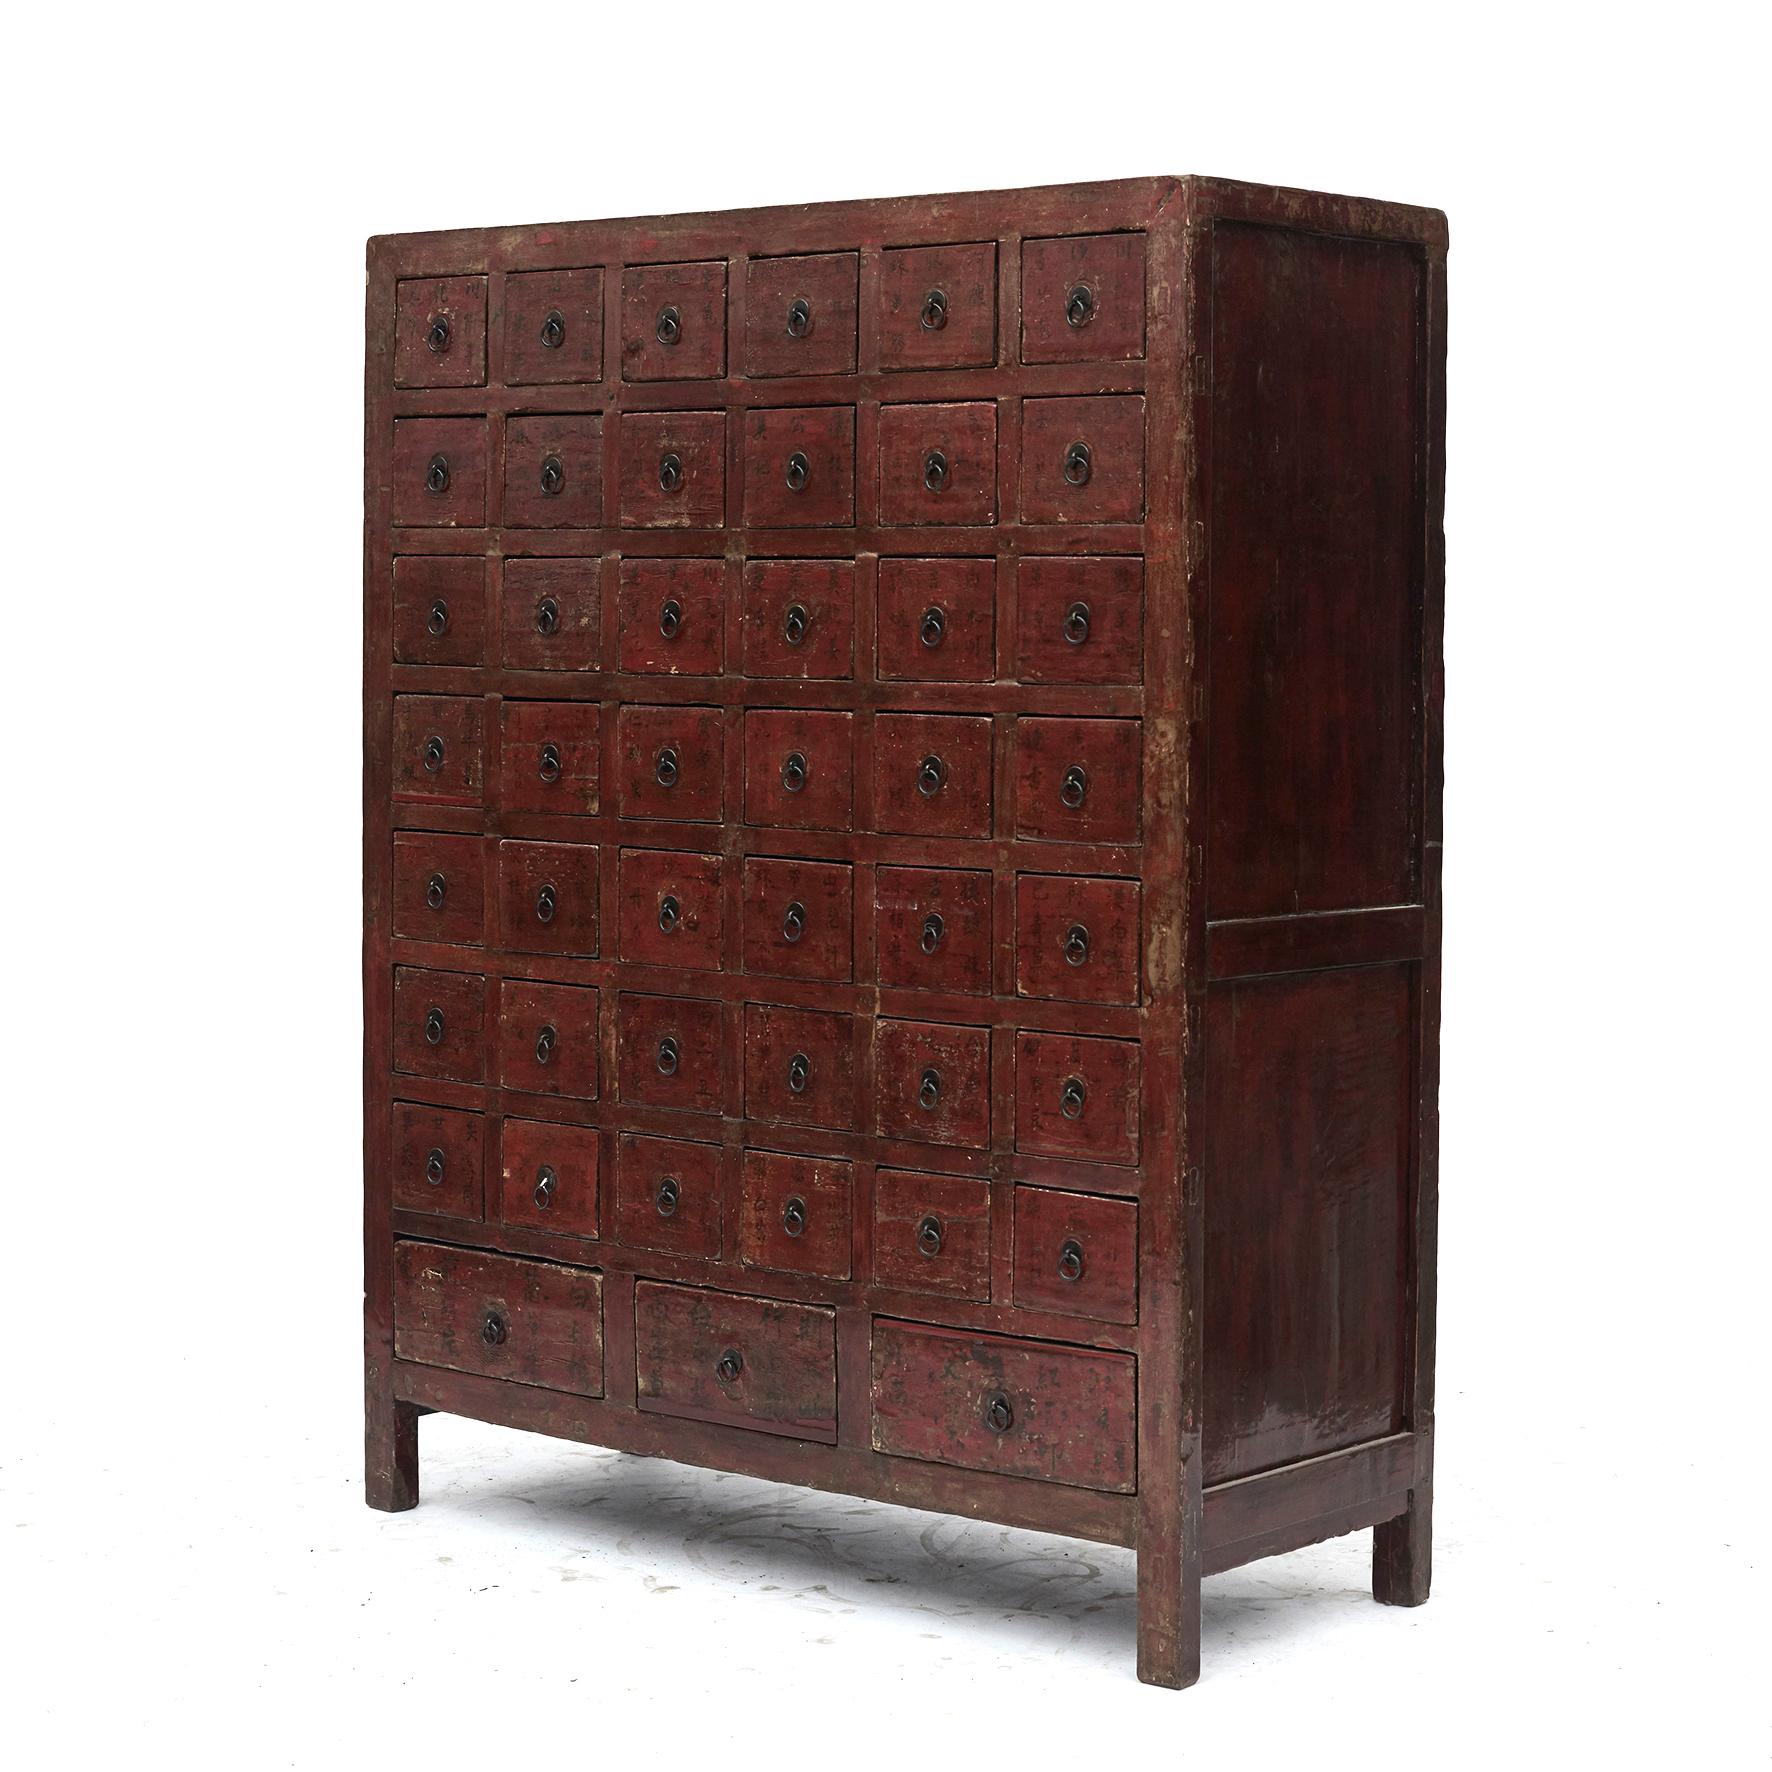 Chinese Antique Apothecary Medicine Chest with 45 Drawers For Sale